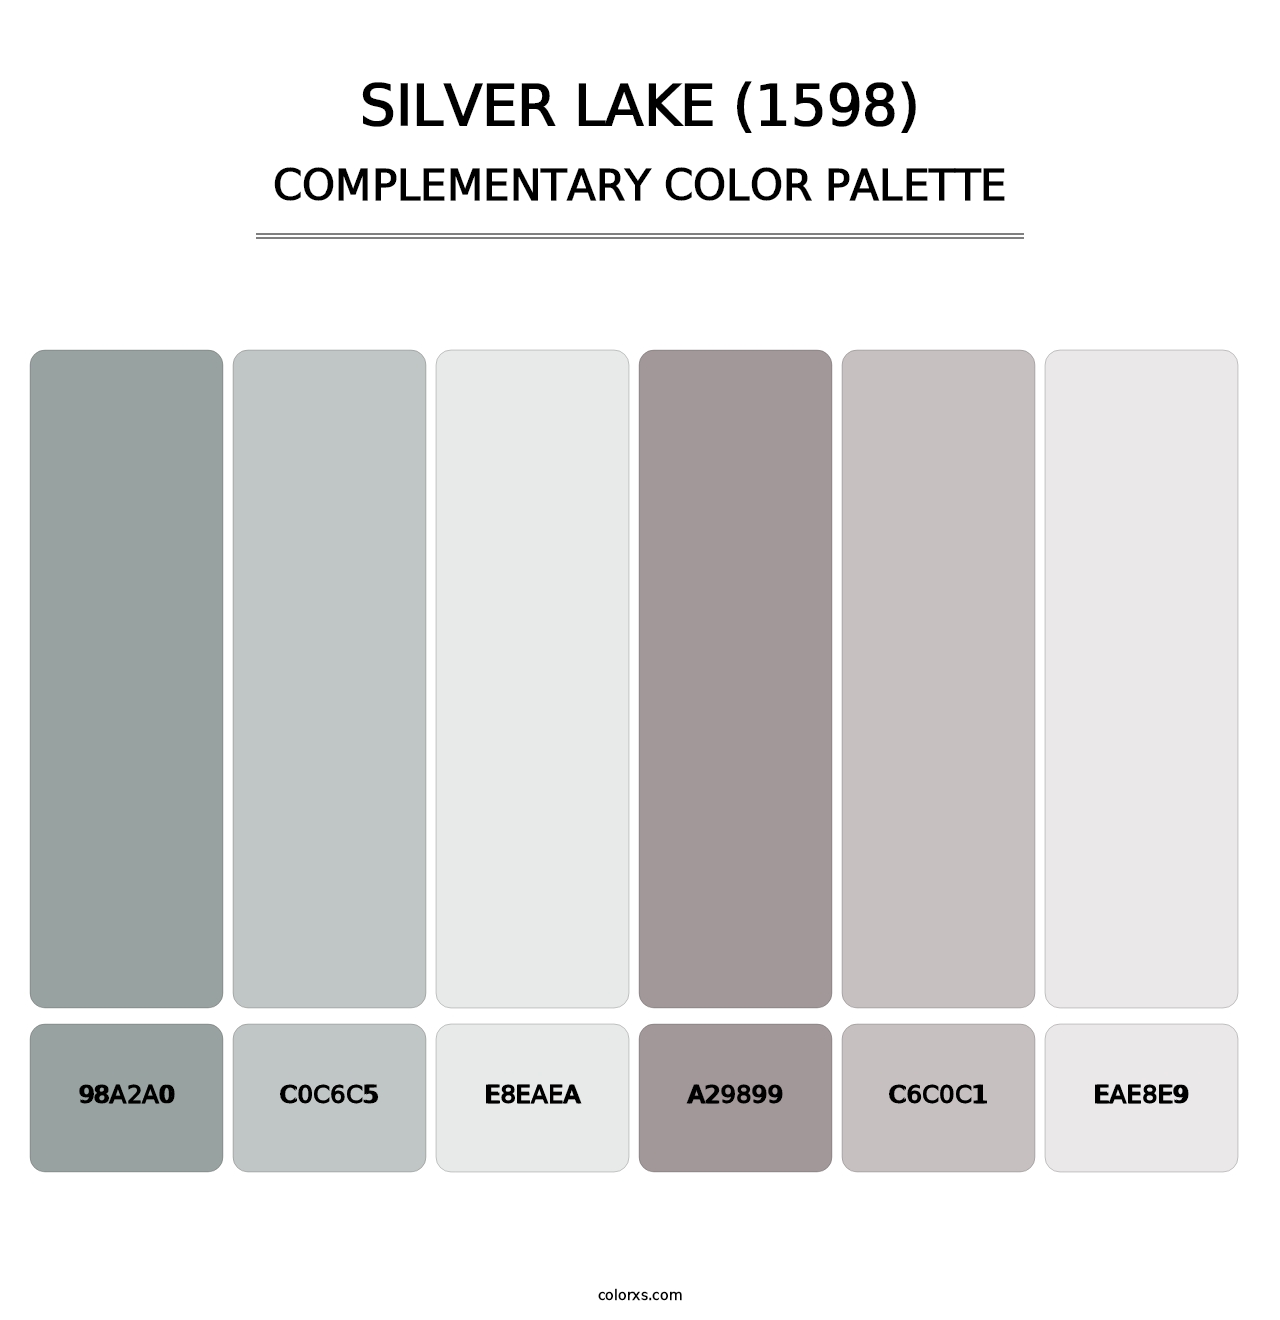 Silver Lake (1598) - Complementary Color Palette